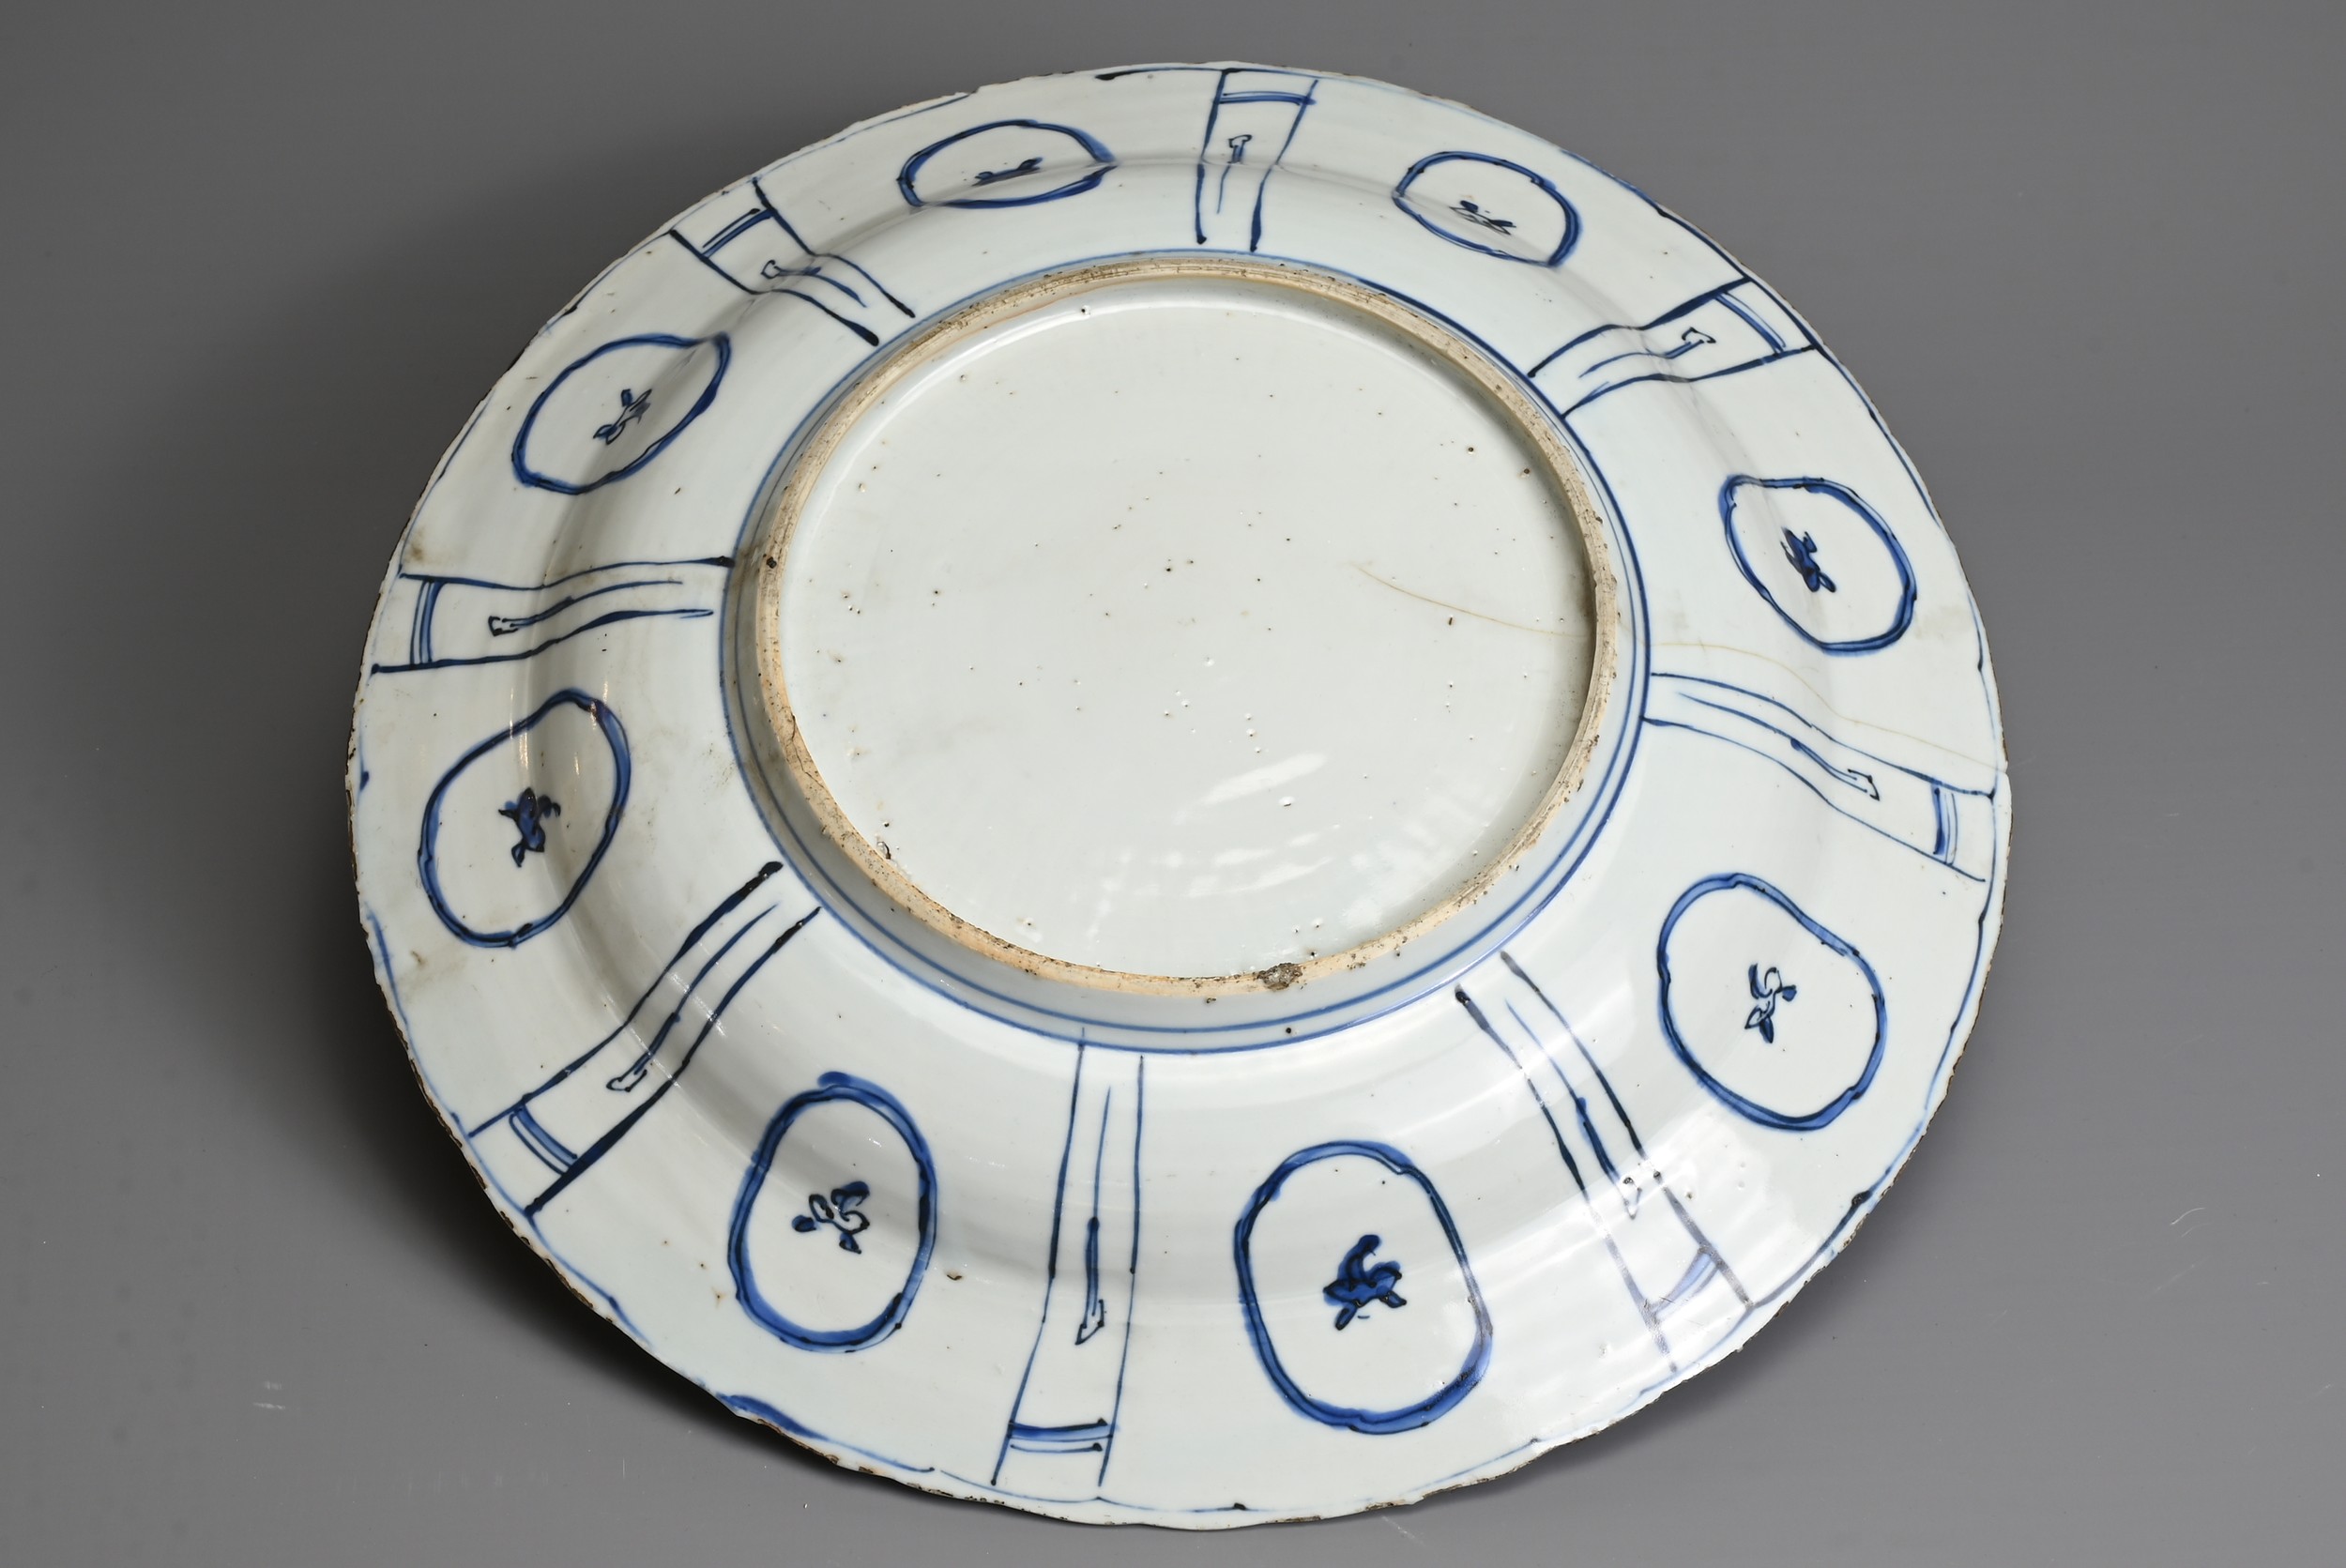 A CHINESE BLUE AND WHITE PORCELAIN KRAAK DISH, MING DYNASTY. Decorated with ducks at a lotus pond - Image 4 of 6